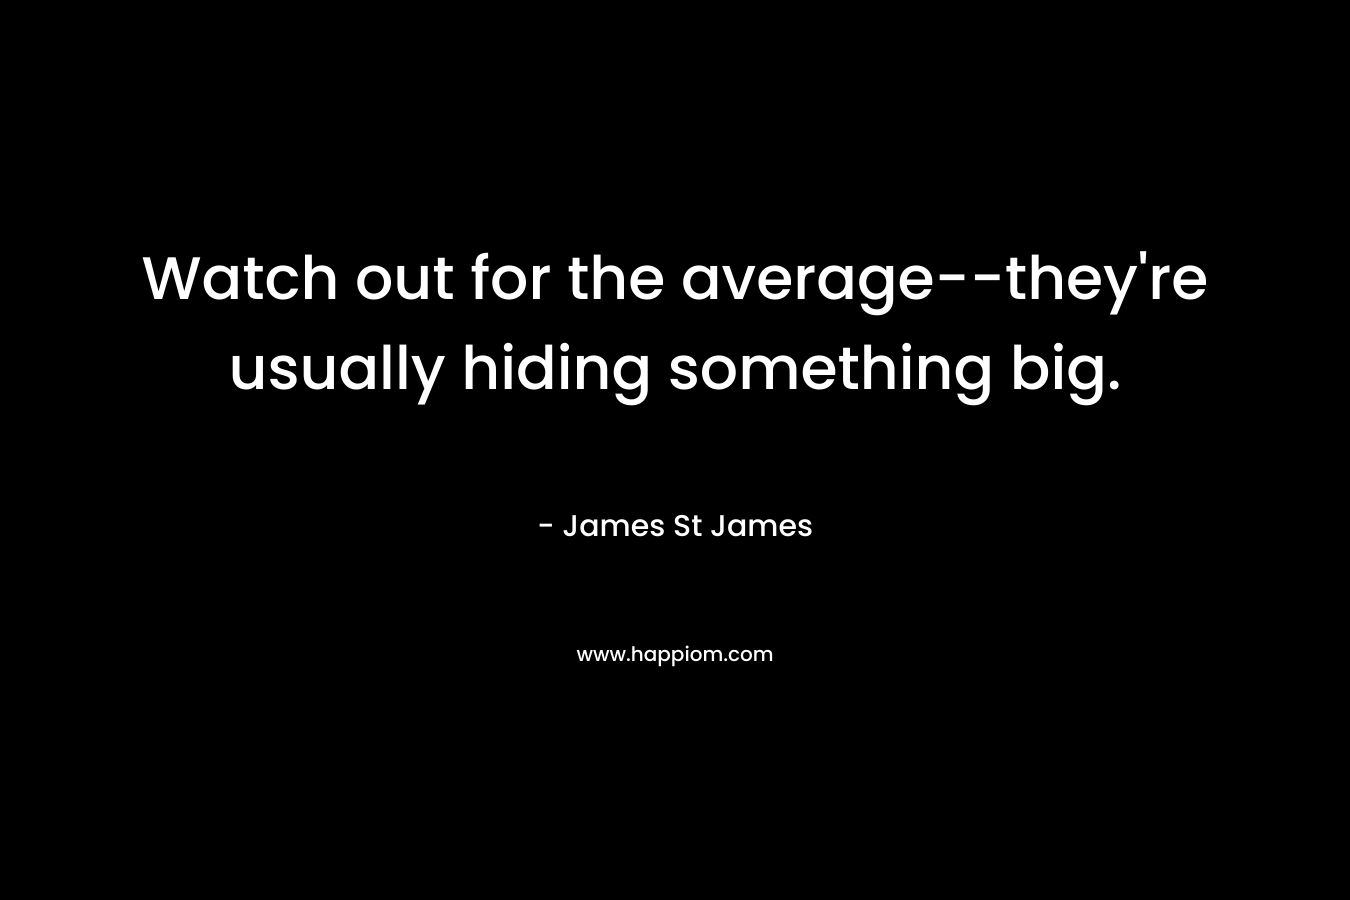 Watch out for the average--they're usually hiding something big.